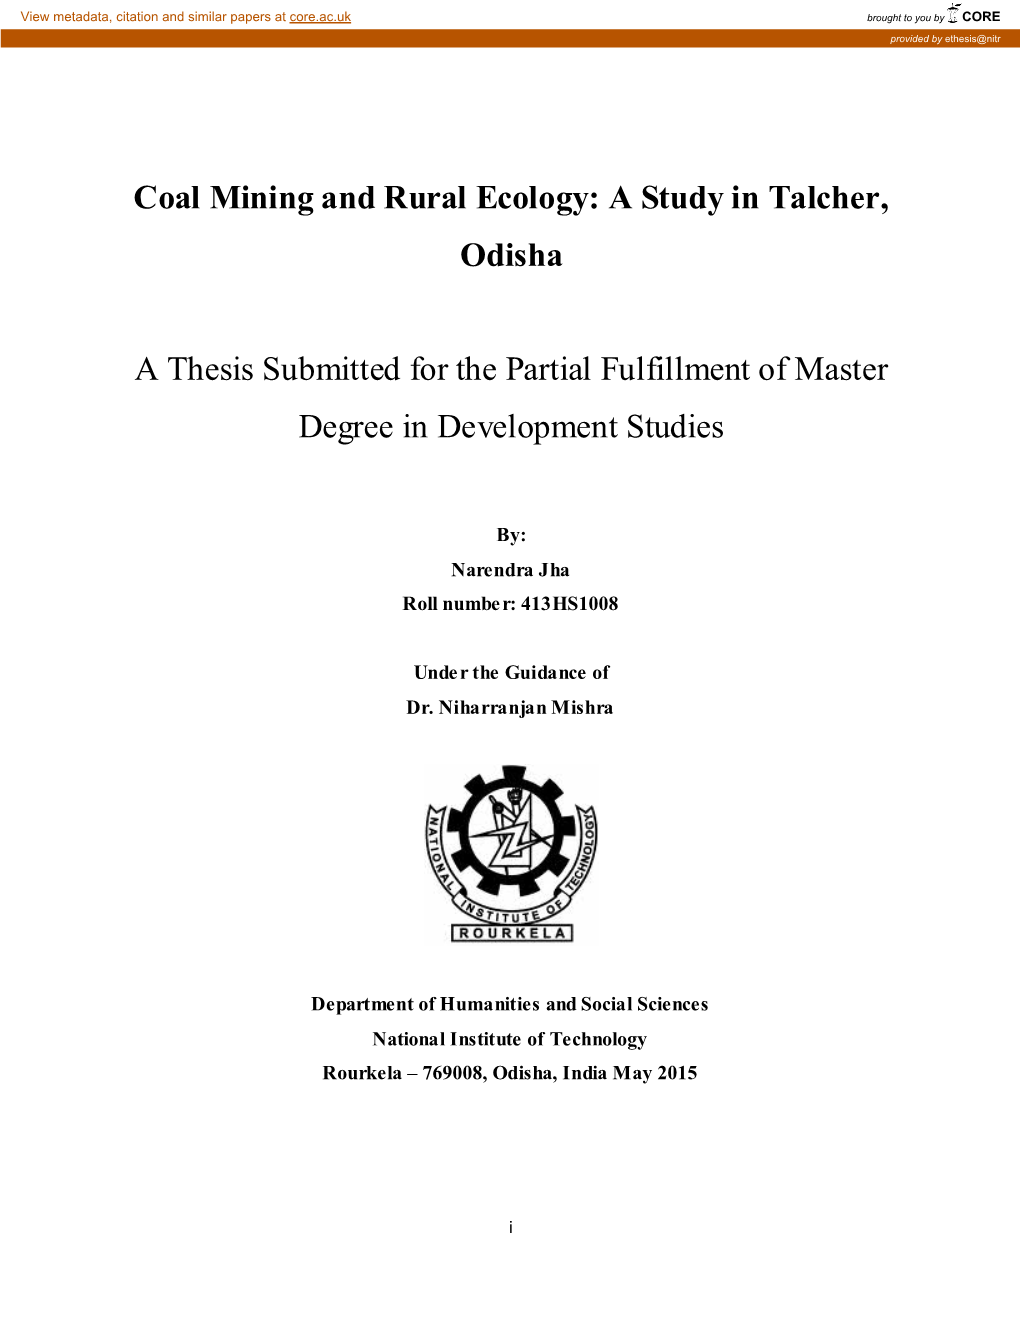 Coal Mining and Rural Ecology: a Study in Talcher, Odisha a Thesis